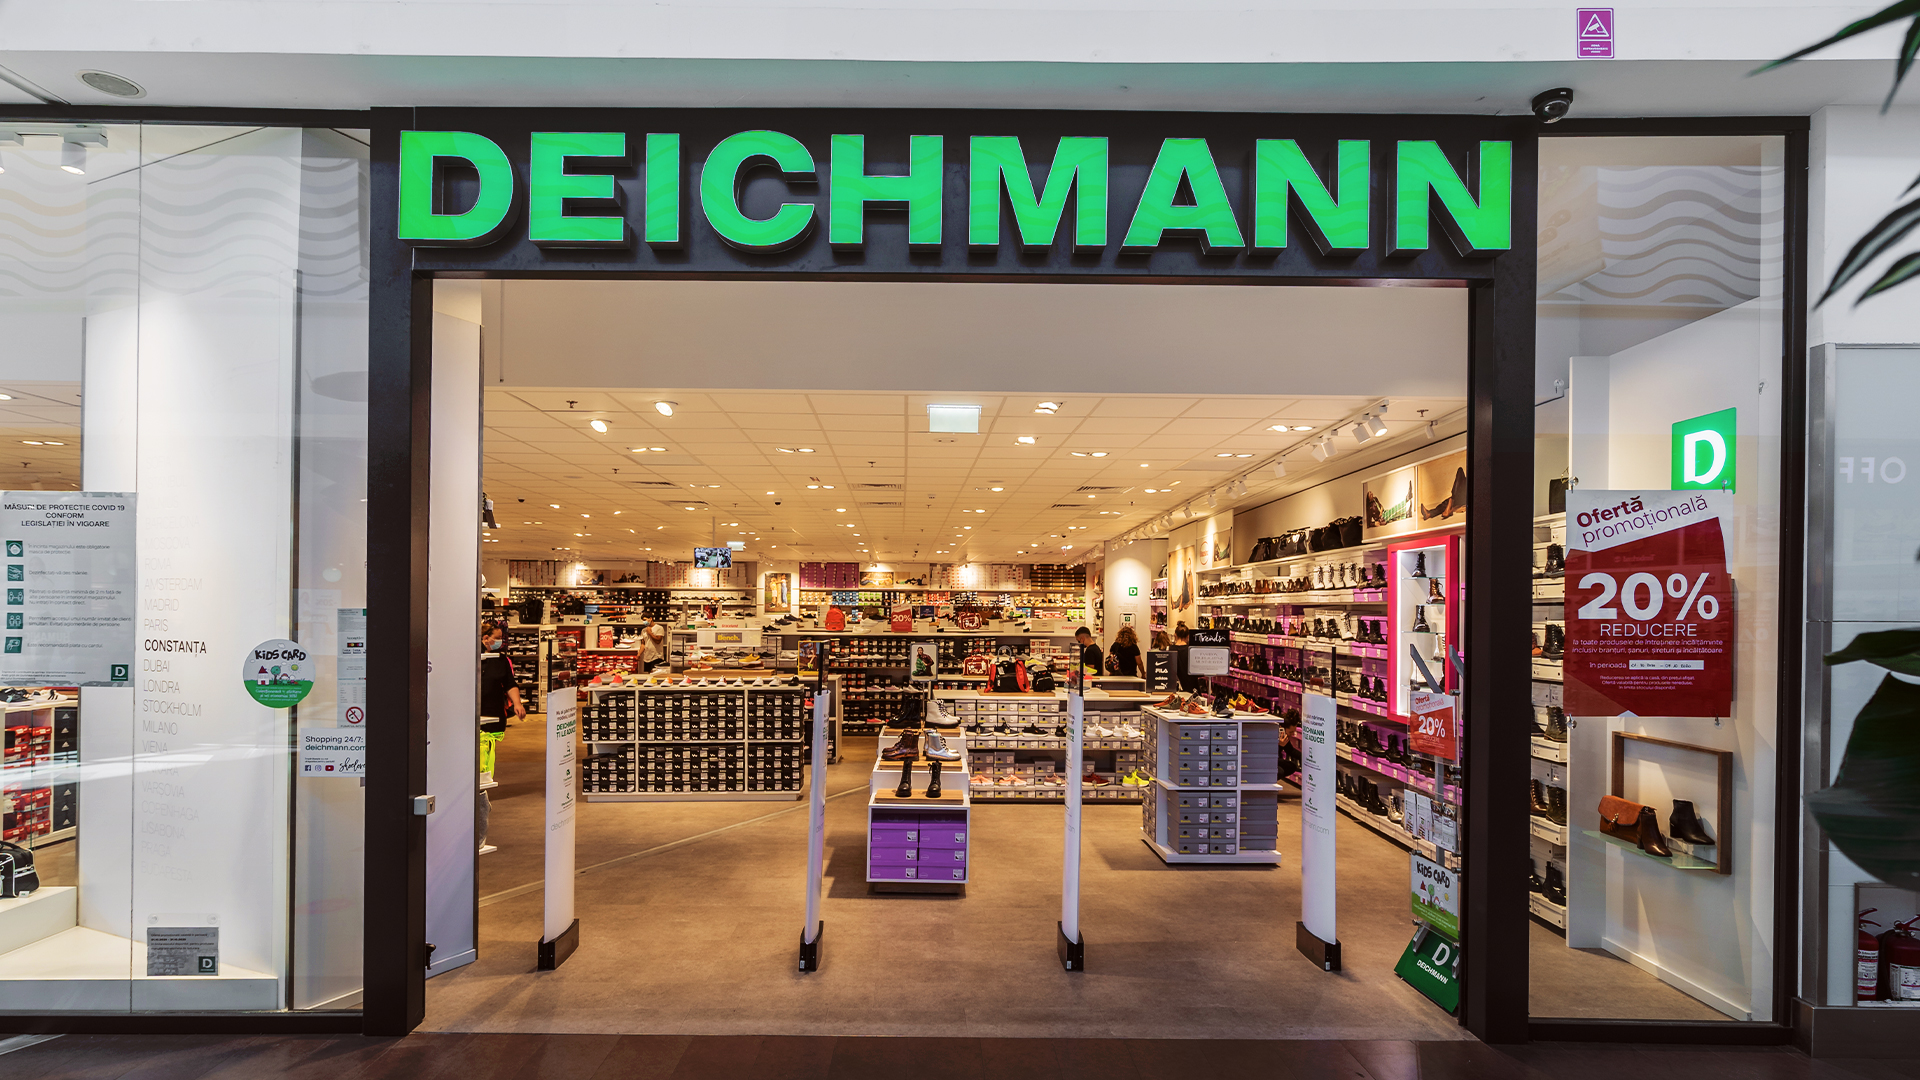 Deichmann offers at the best prices